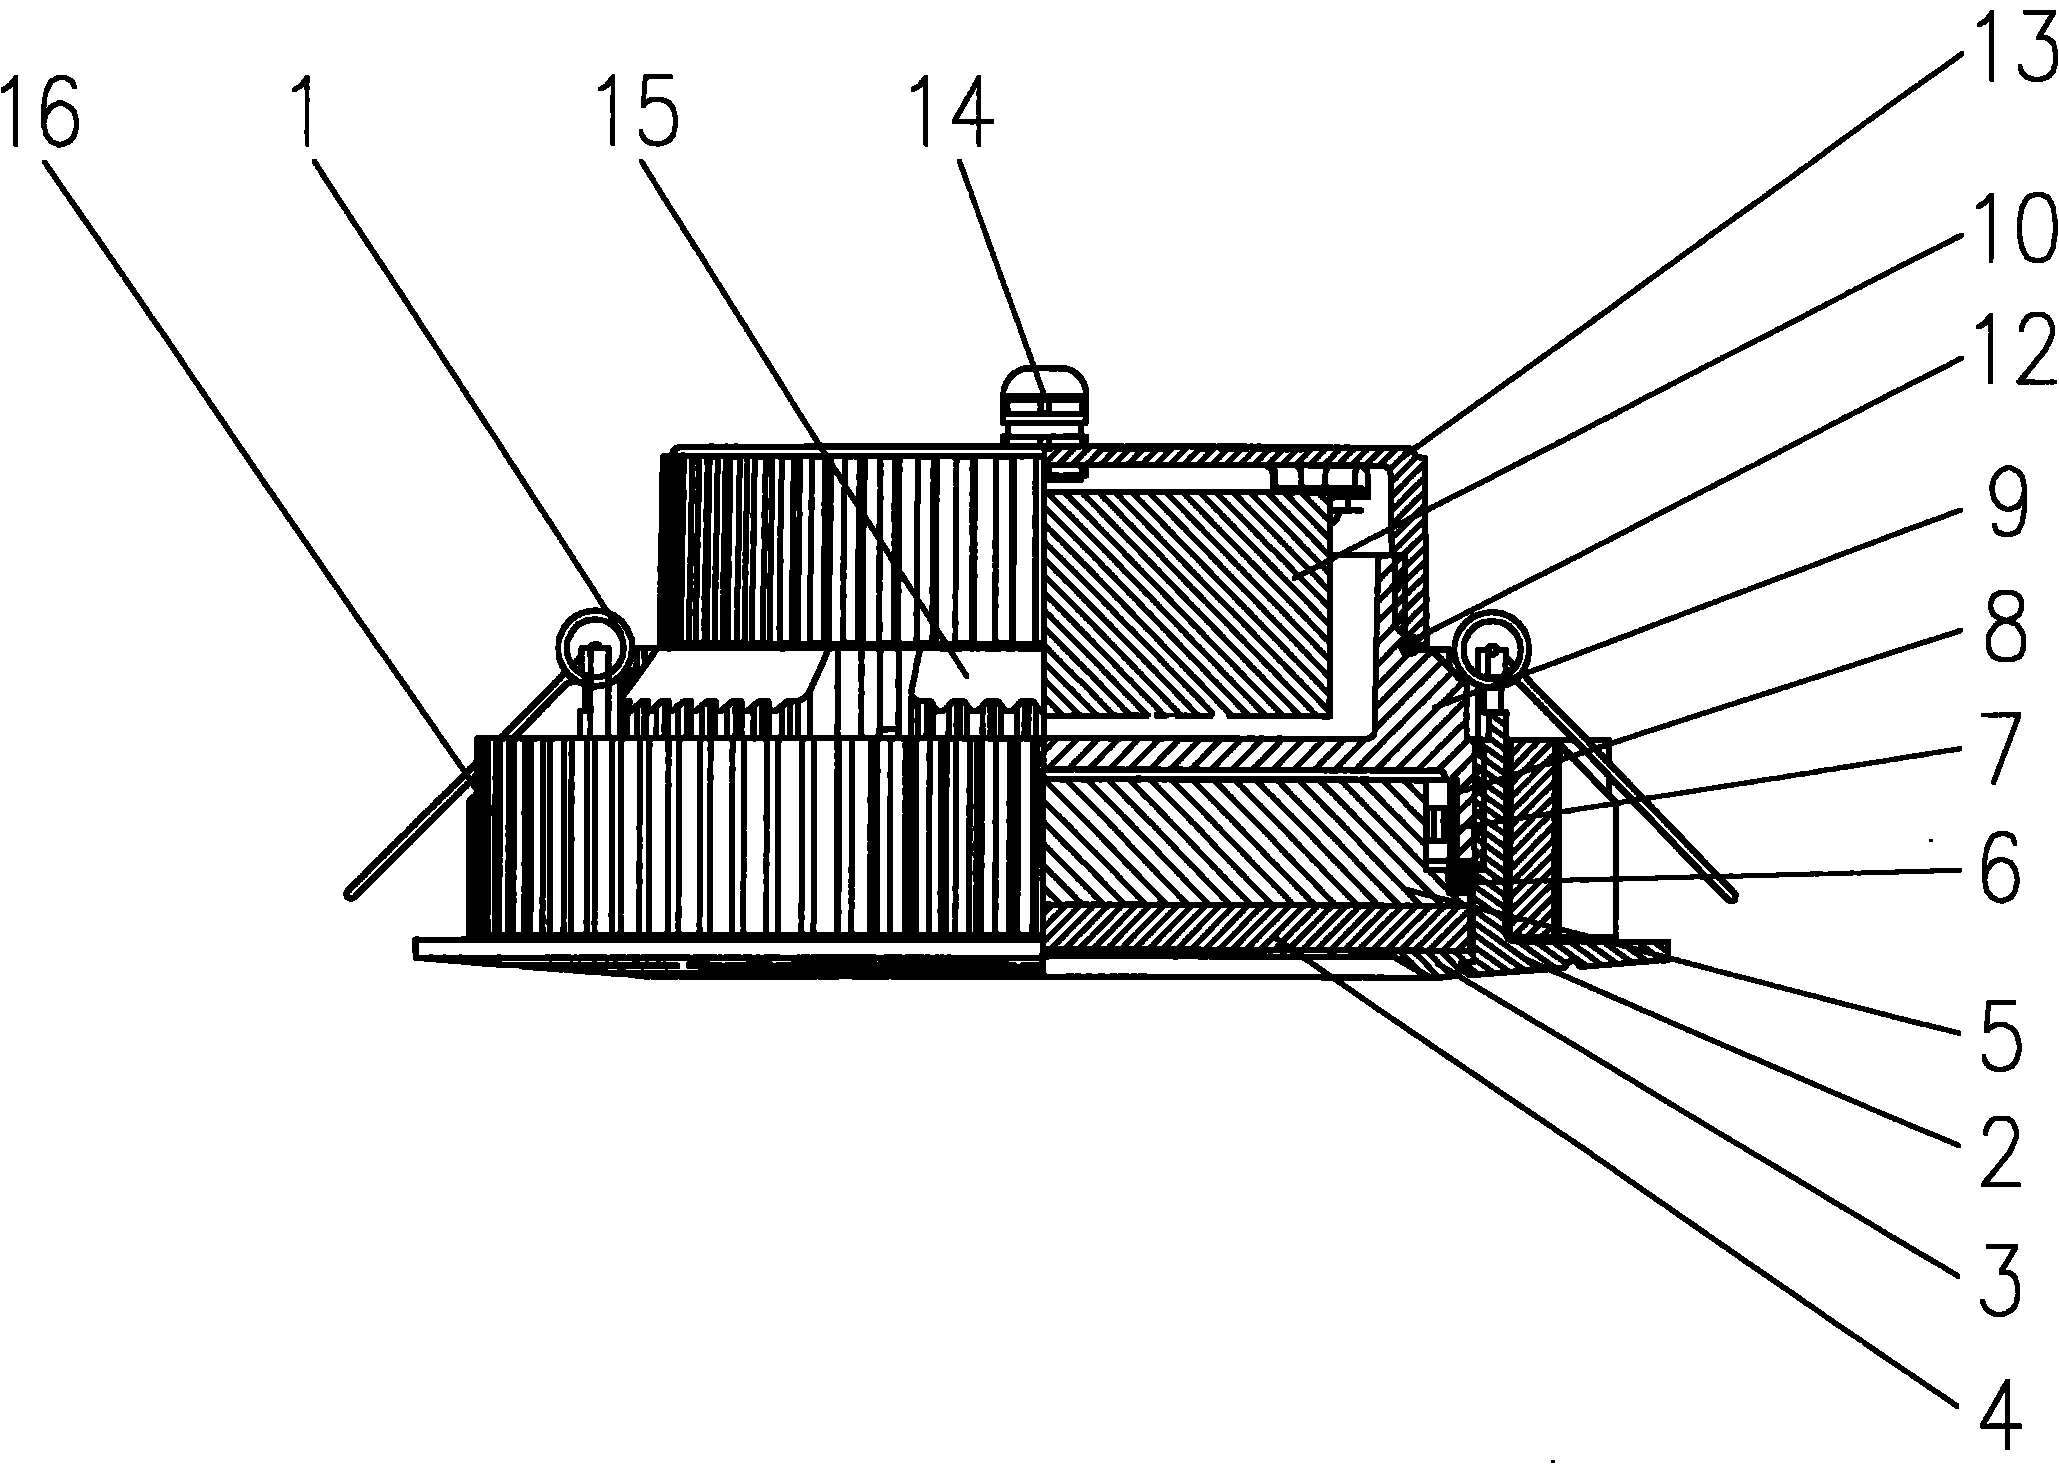 Light conduction plane lamp with built-in power